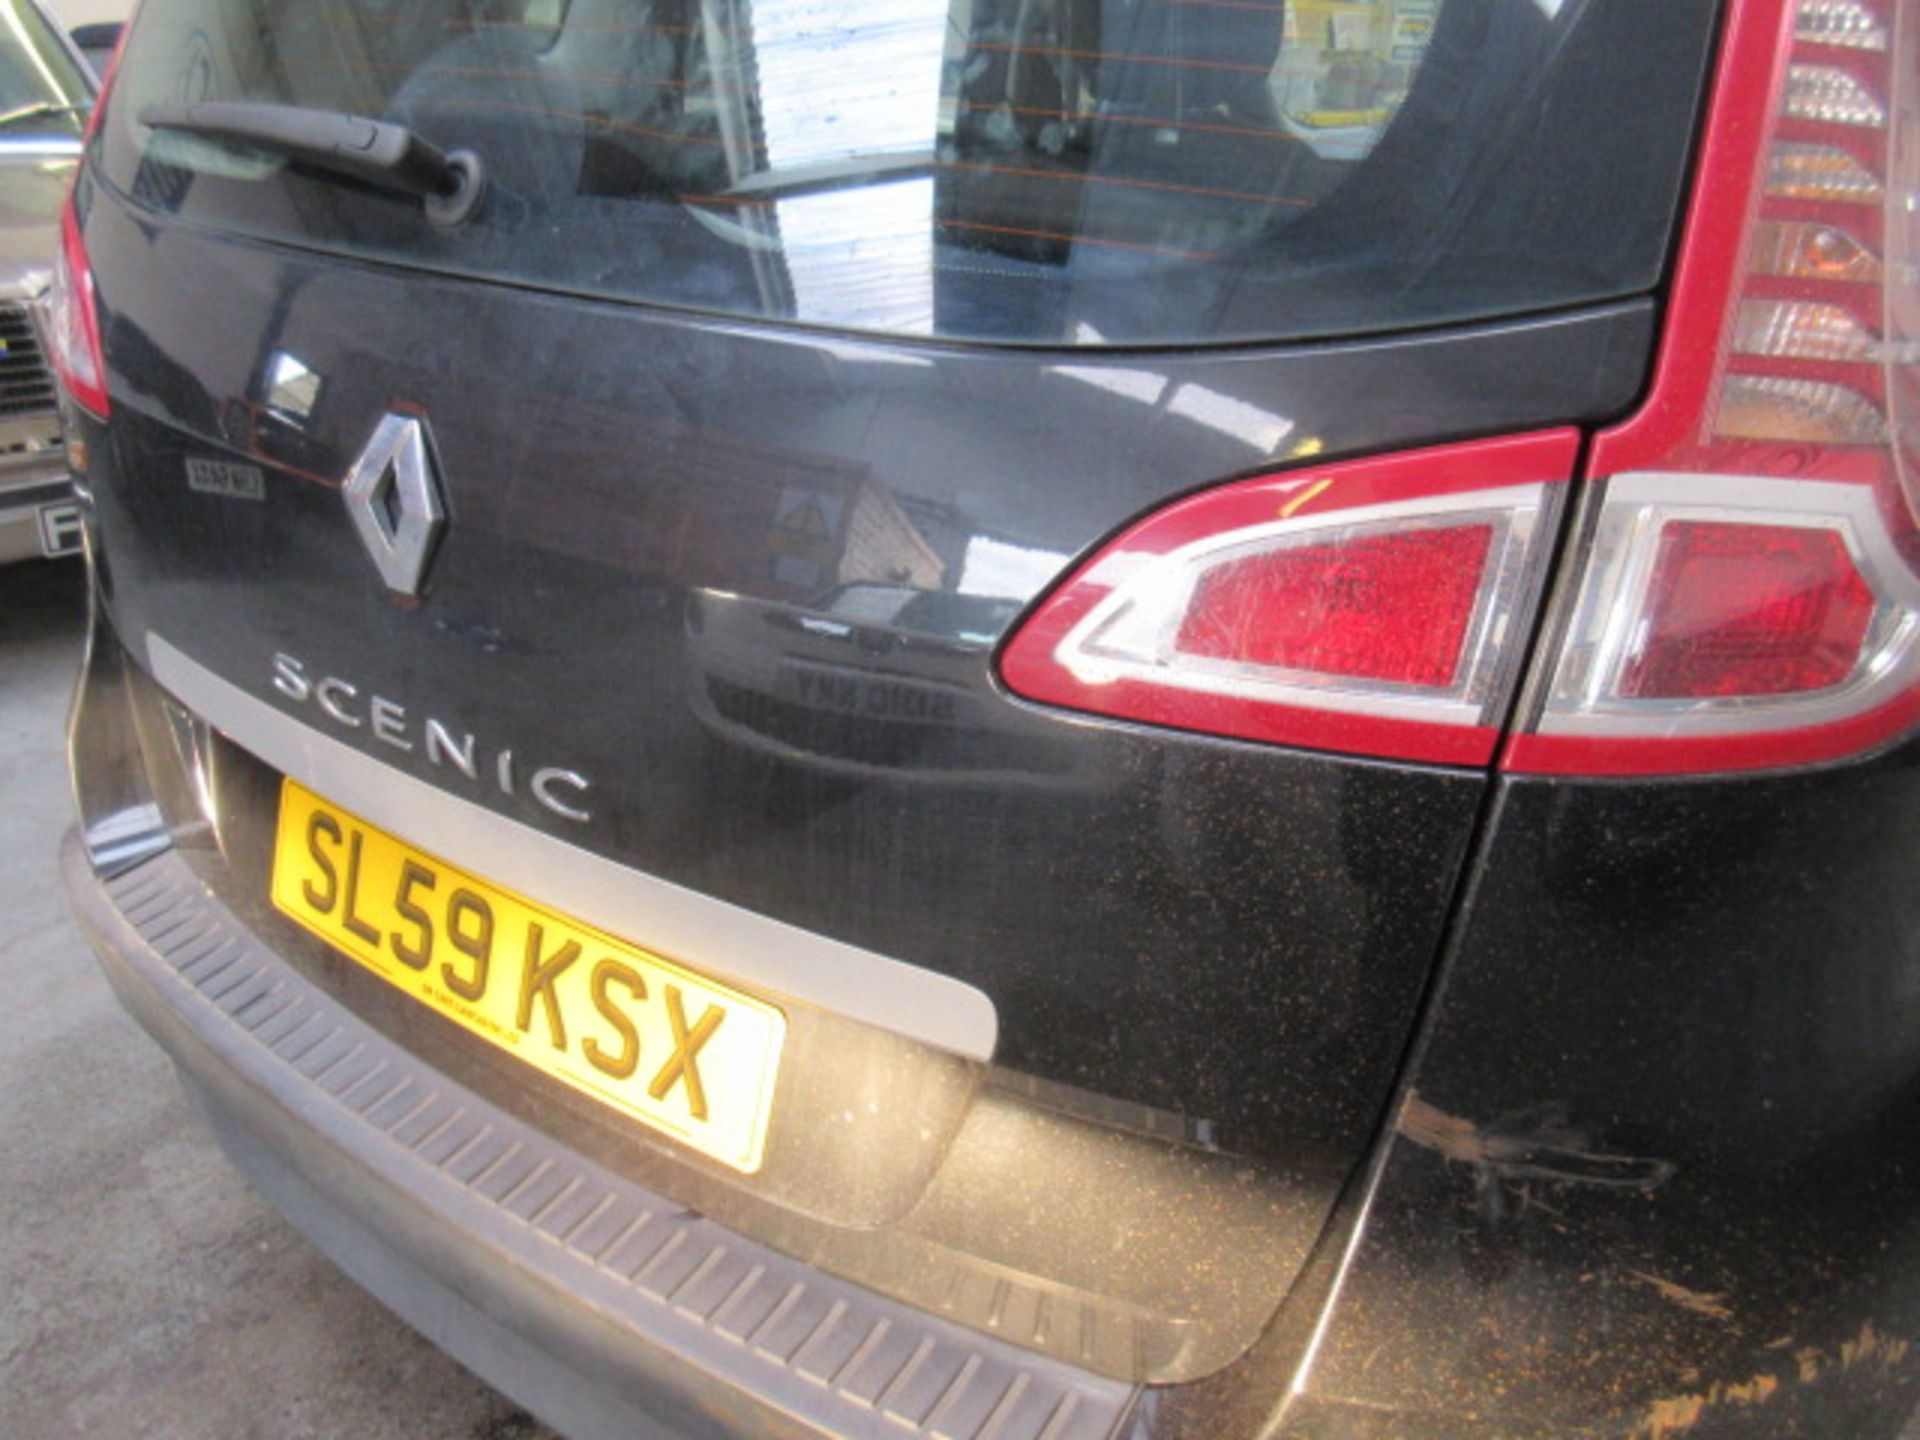 59 09 Renault Scenic Dyn VVT - Image 10 of 24